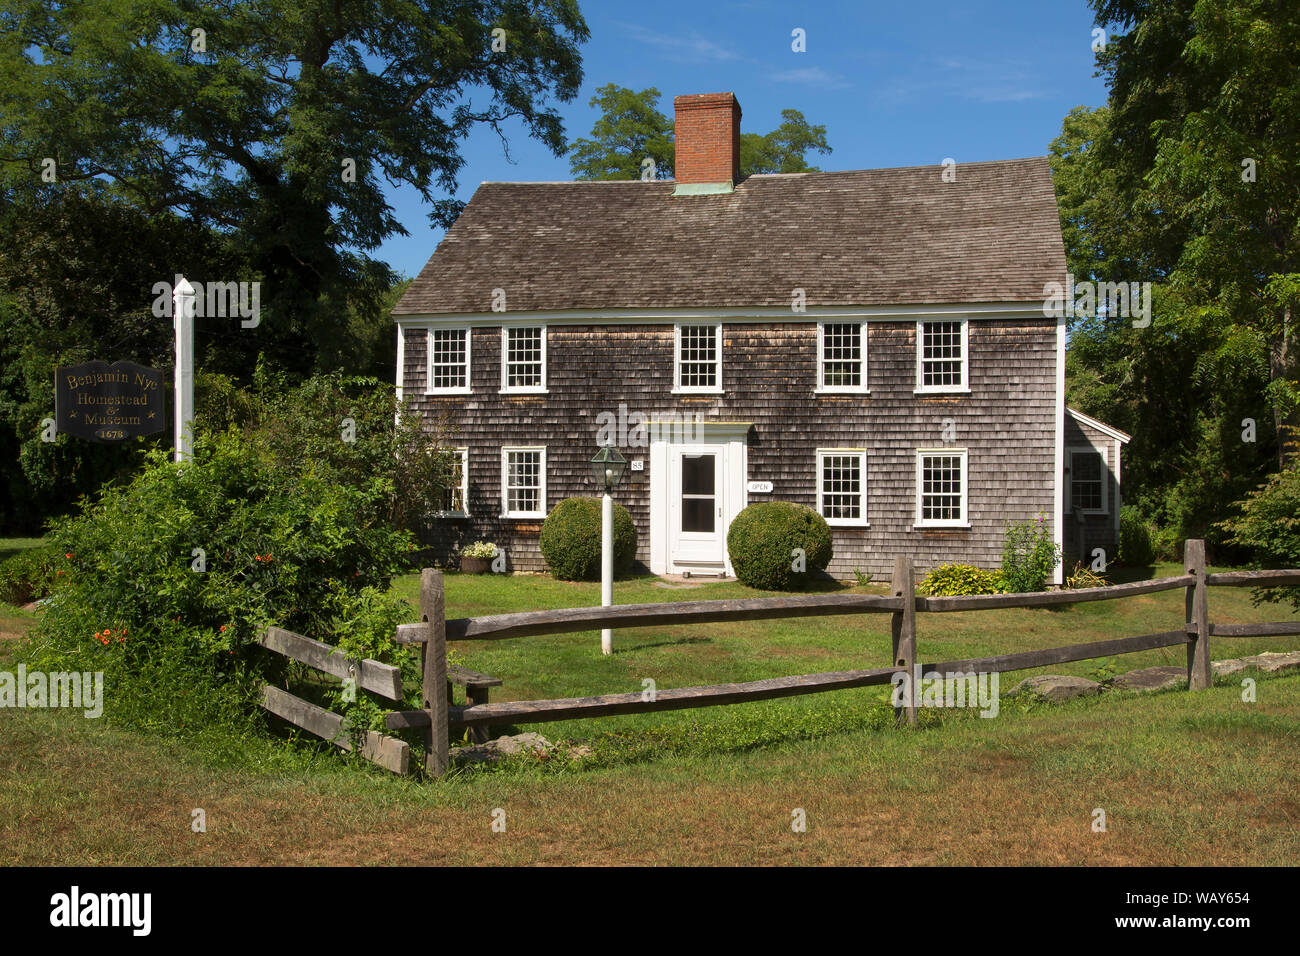 The Benjamin Nye Homestead and Museum.  Built in 1678 in East Sandwich, Massachusetts (USA)  is the homestead of the Nye family. Stock Photo